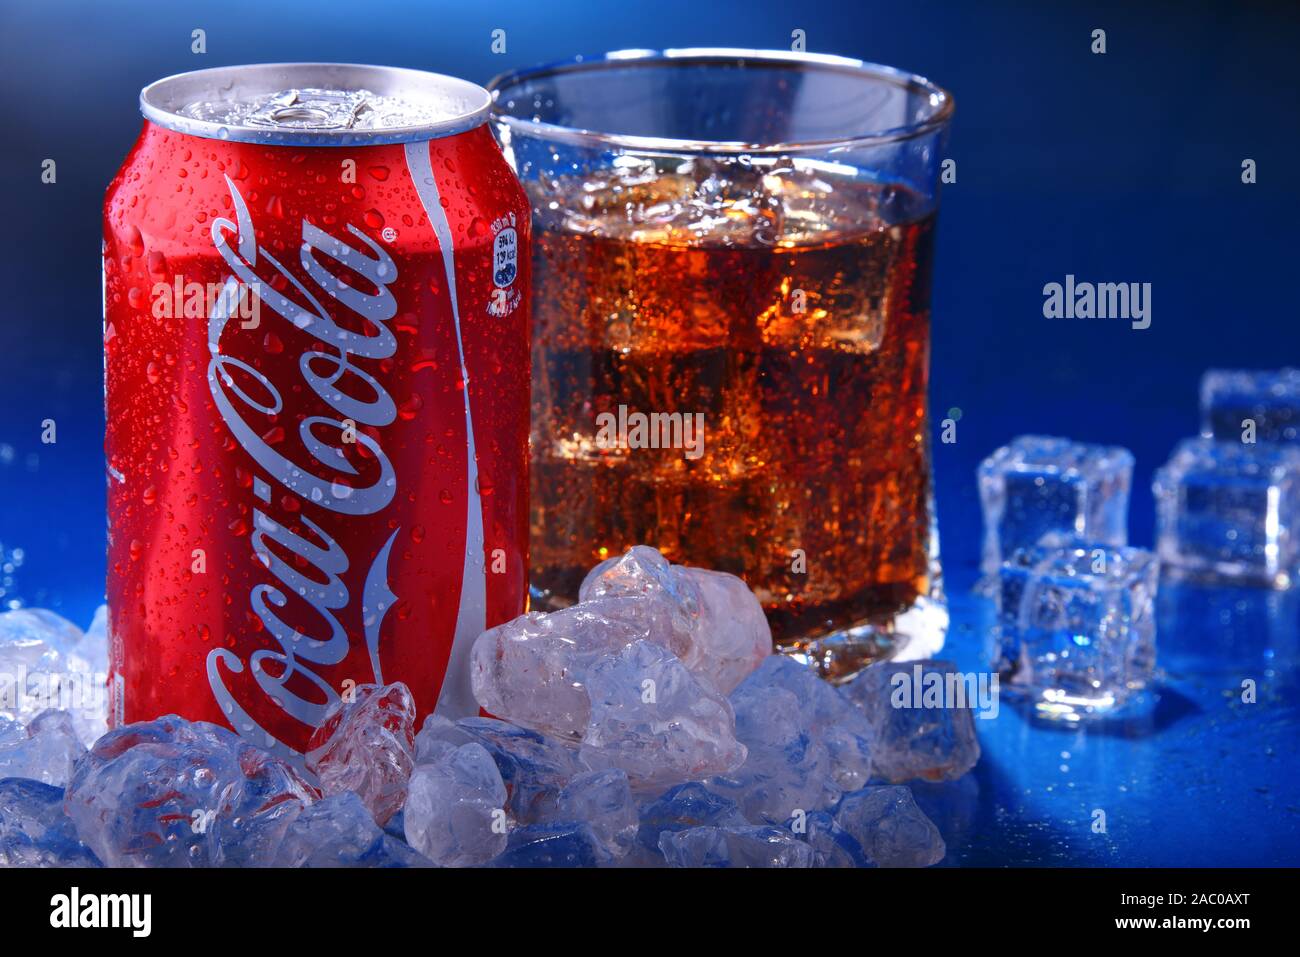 POZNAN, POL - NOV 22, 2019: Can and glass of Coca-Cola, a carbonated soft drink manufactured by The Coca-Cola Company headquartered in Atlanta, Georgi Stock Photo